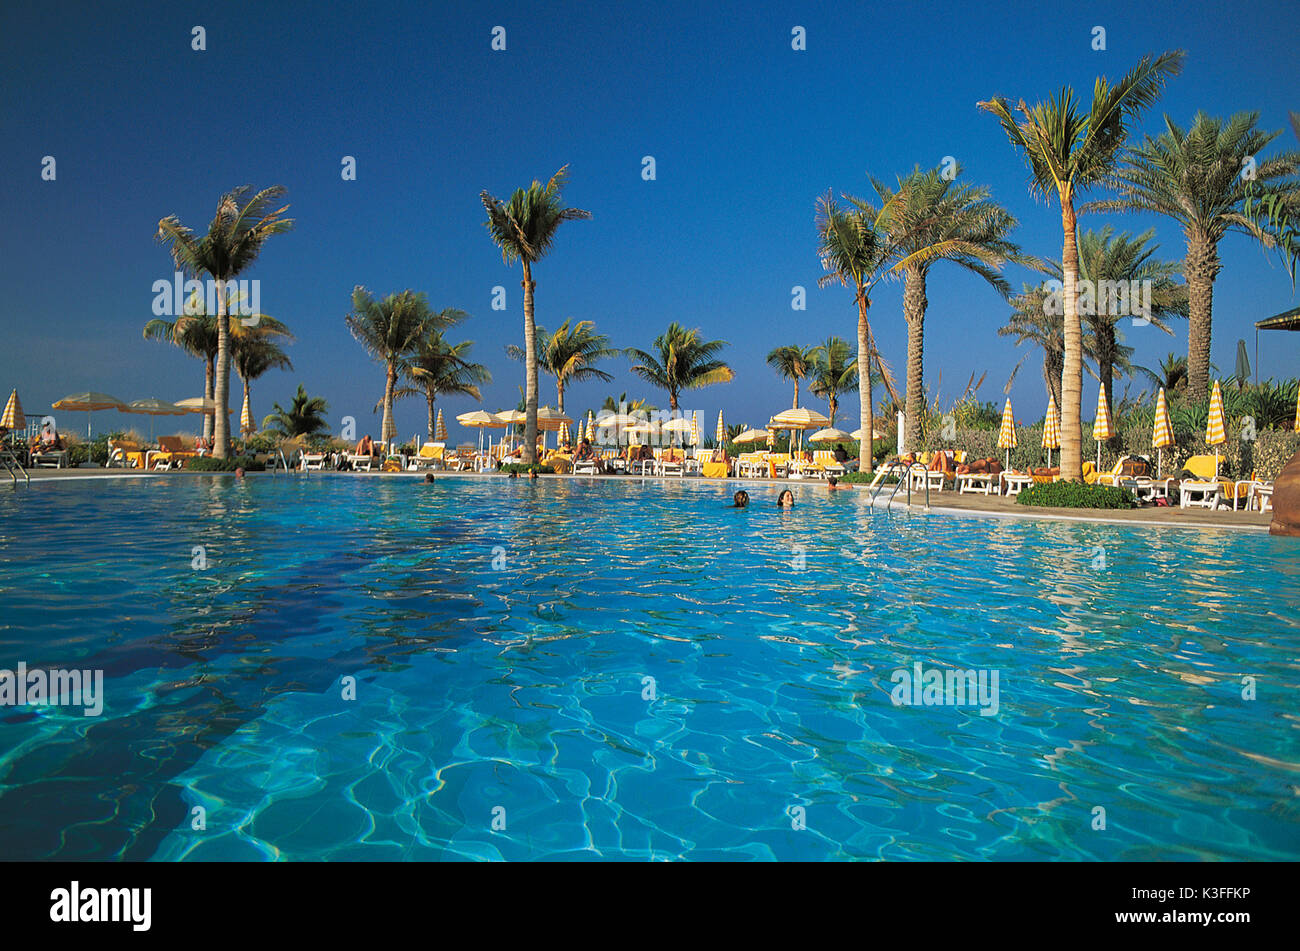 Swimming pool / pool of a holiday's hotel close palms Stock Photo